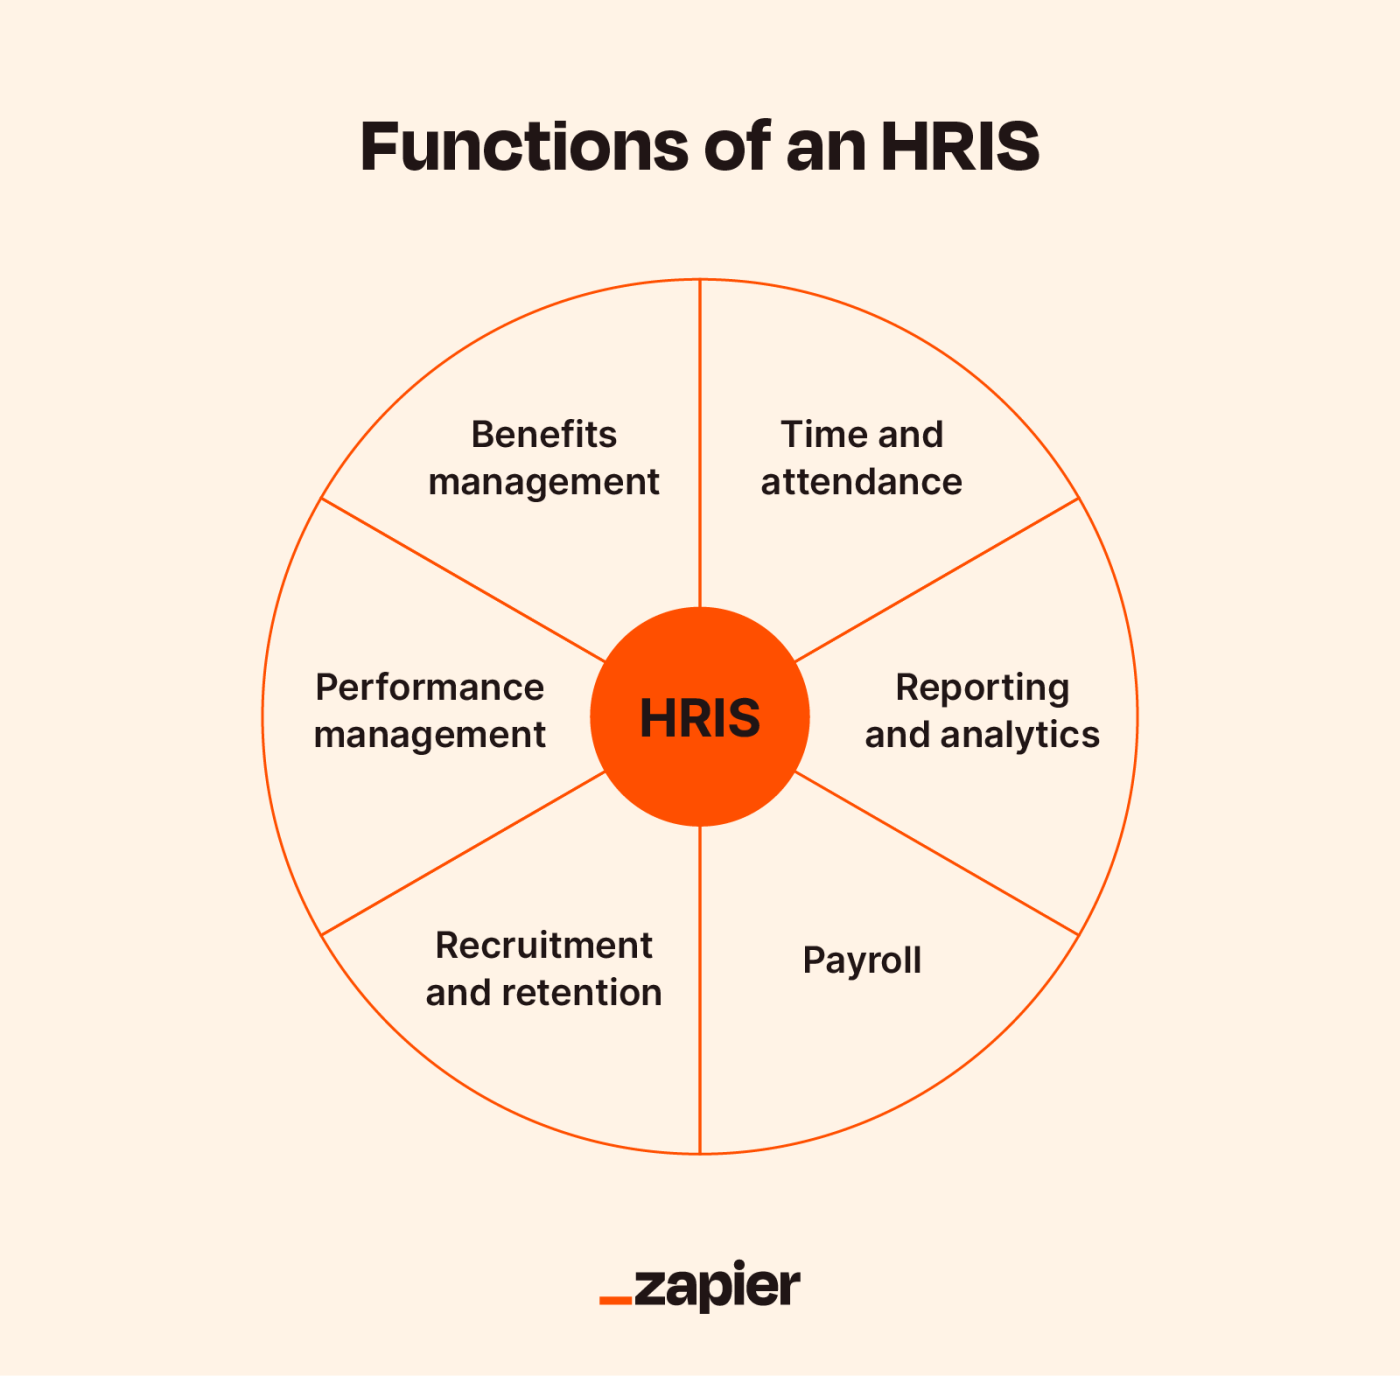 Illustration of a wheel shape on a tan background titled "Functions of an HRIS," with wedges that say: time and attendance, reporting and analytics, payroll, recruitment and retention, performance management, and benefits management